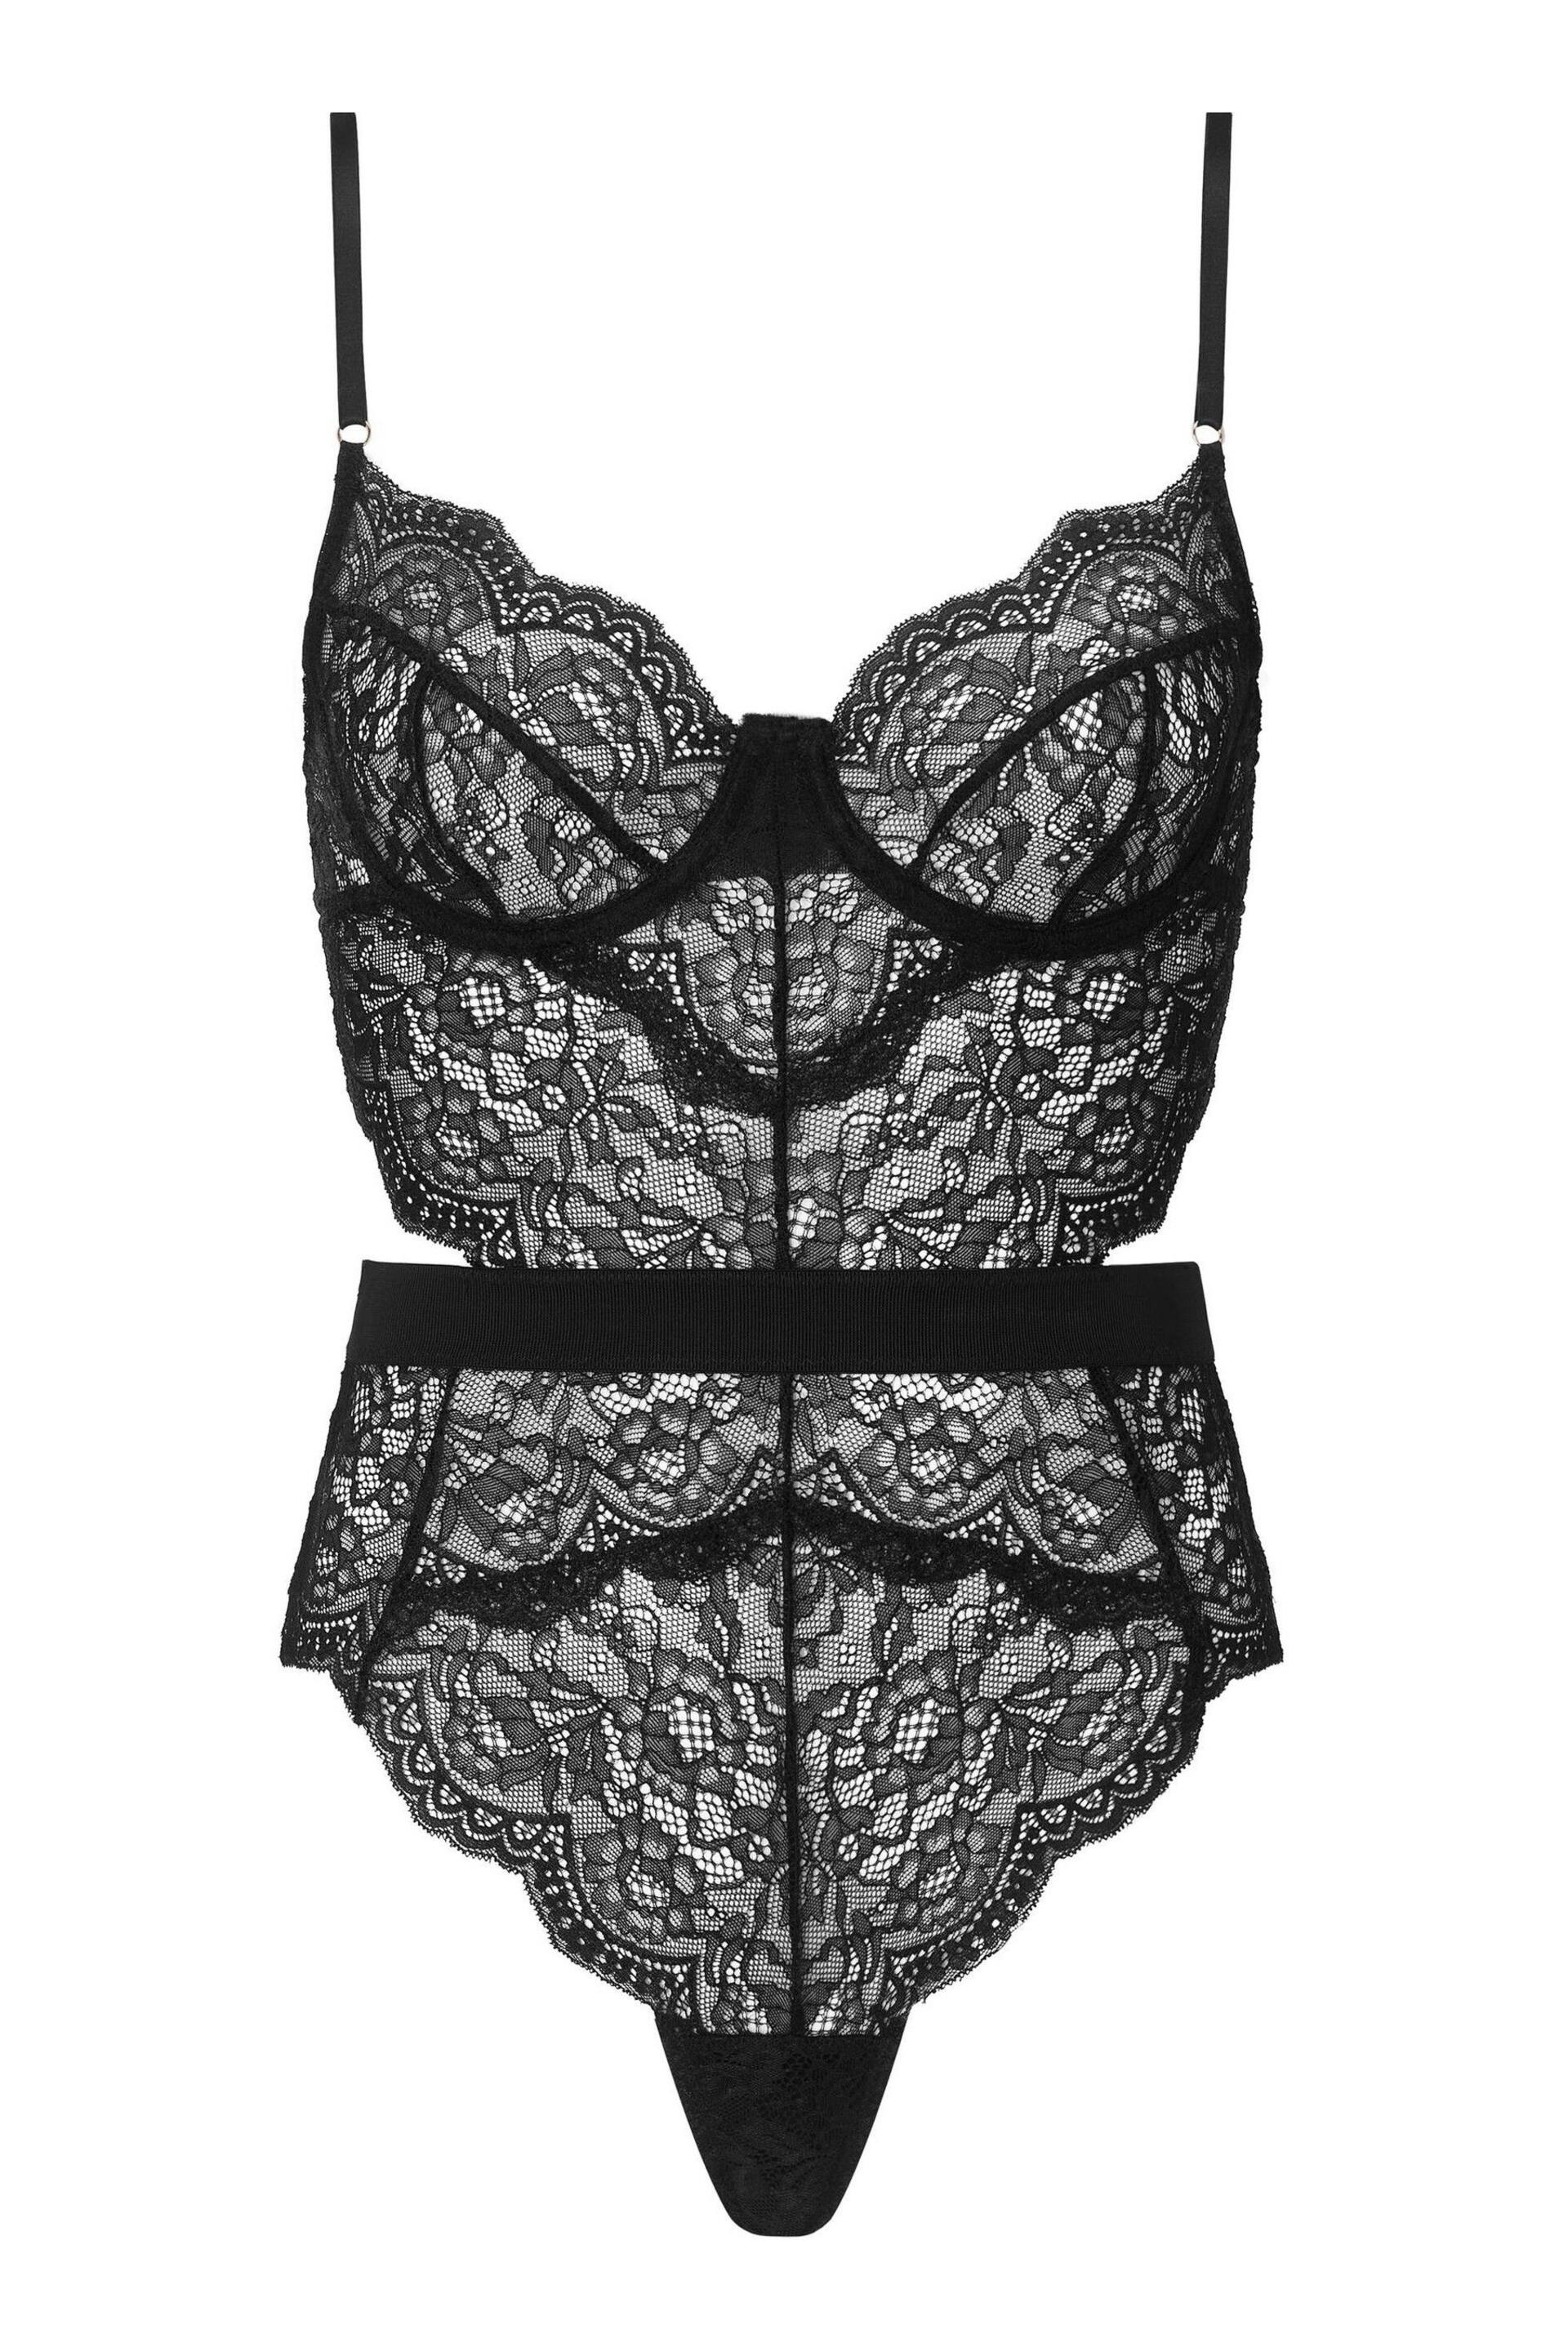 Ann Summers Black 3 Hold Me Tight Lace Bodysuit - Image 7 of 7